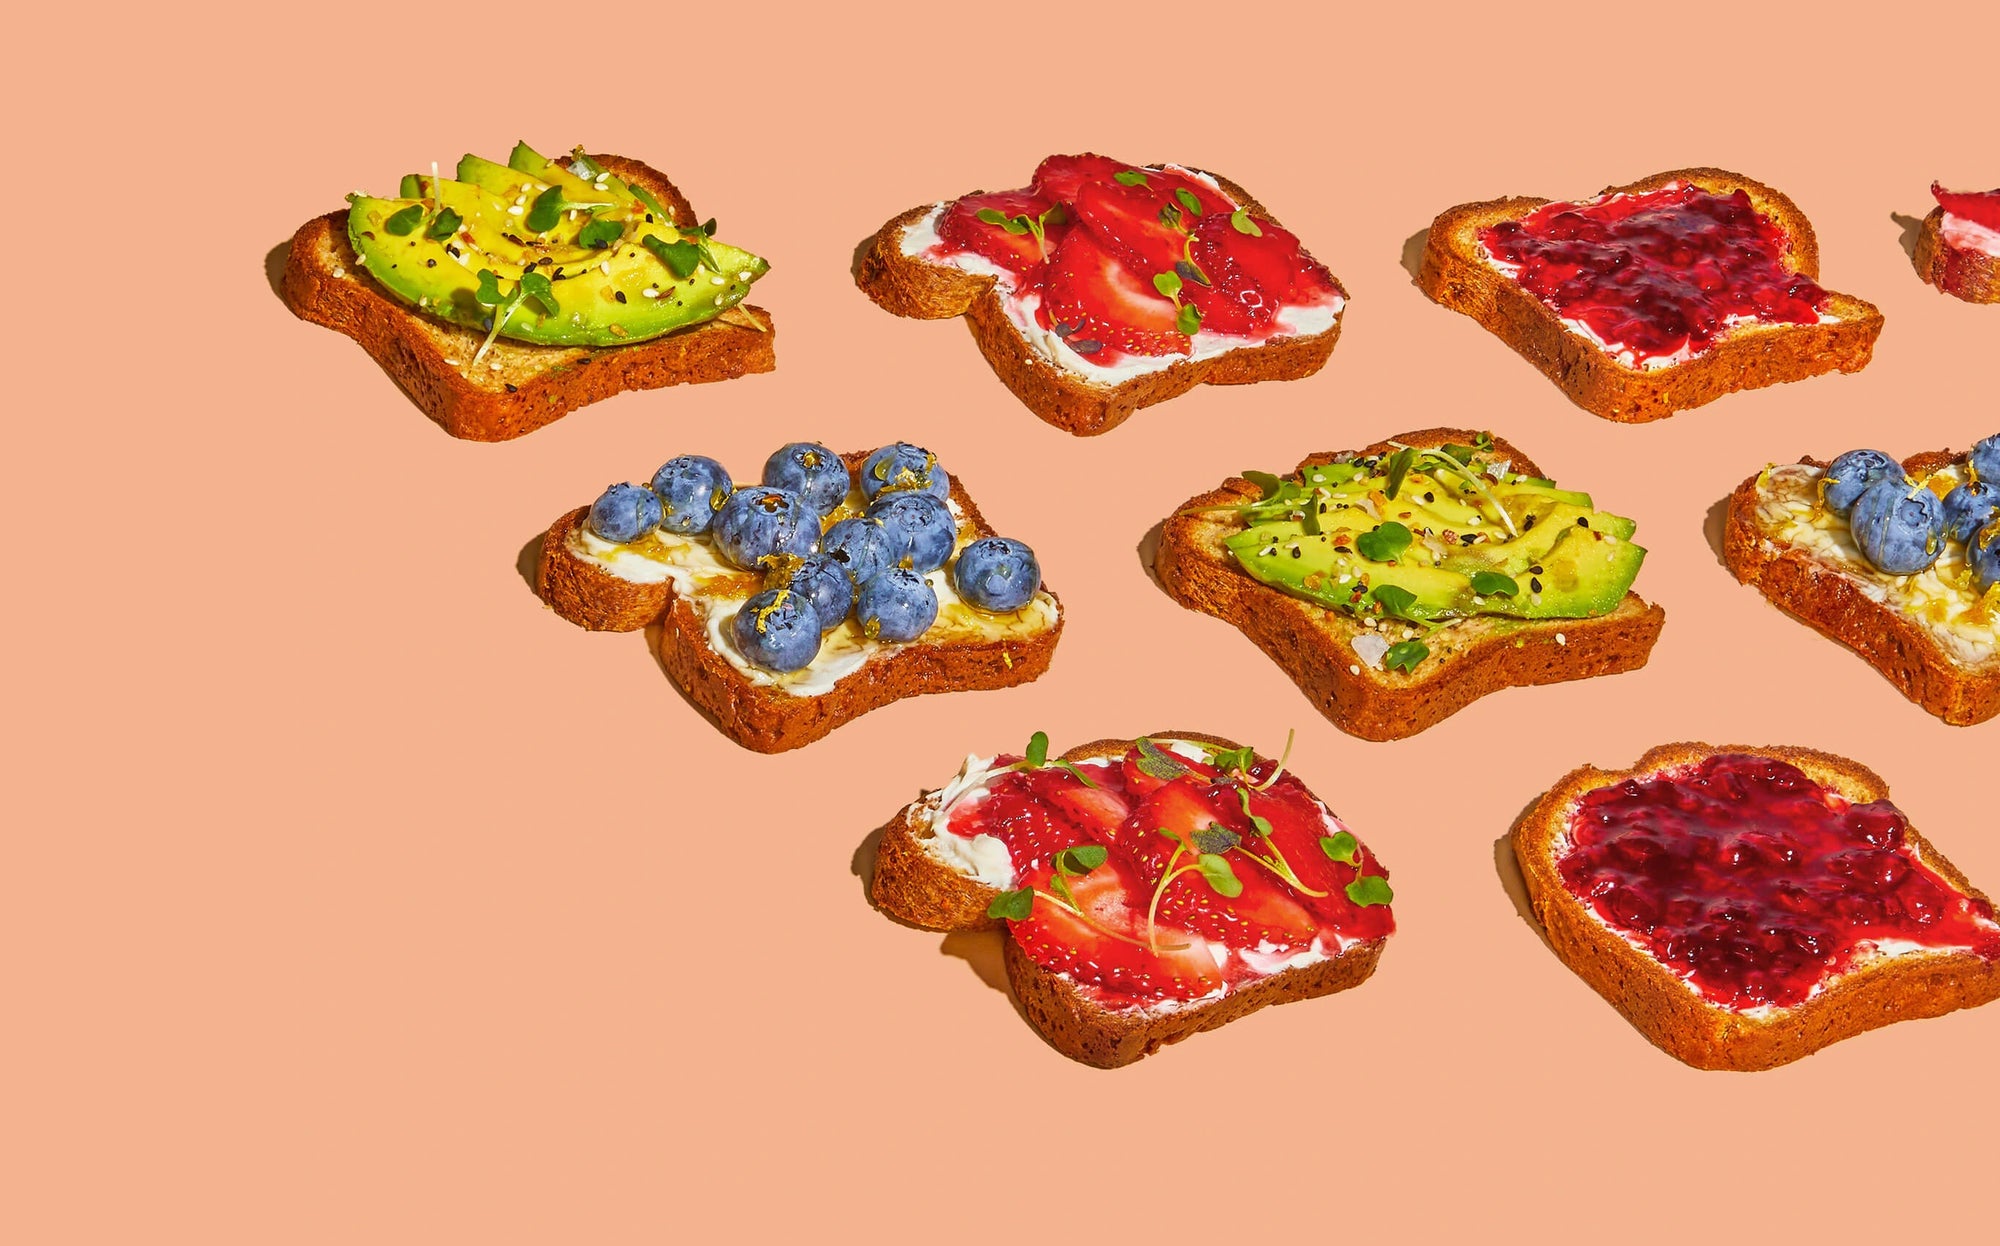 Slices of Base Culture Bread with Various Toppings